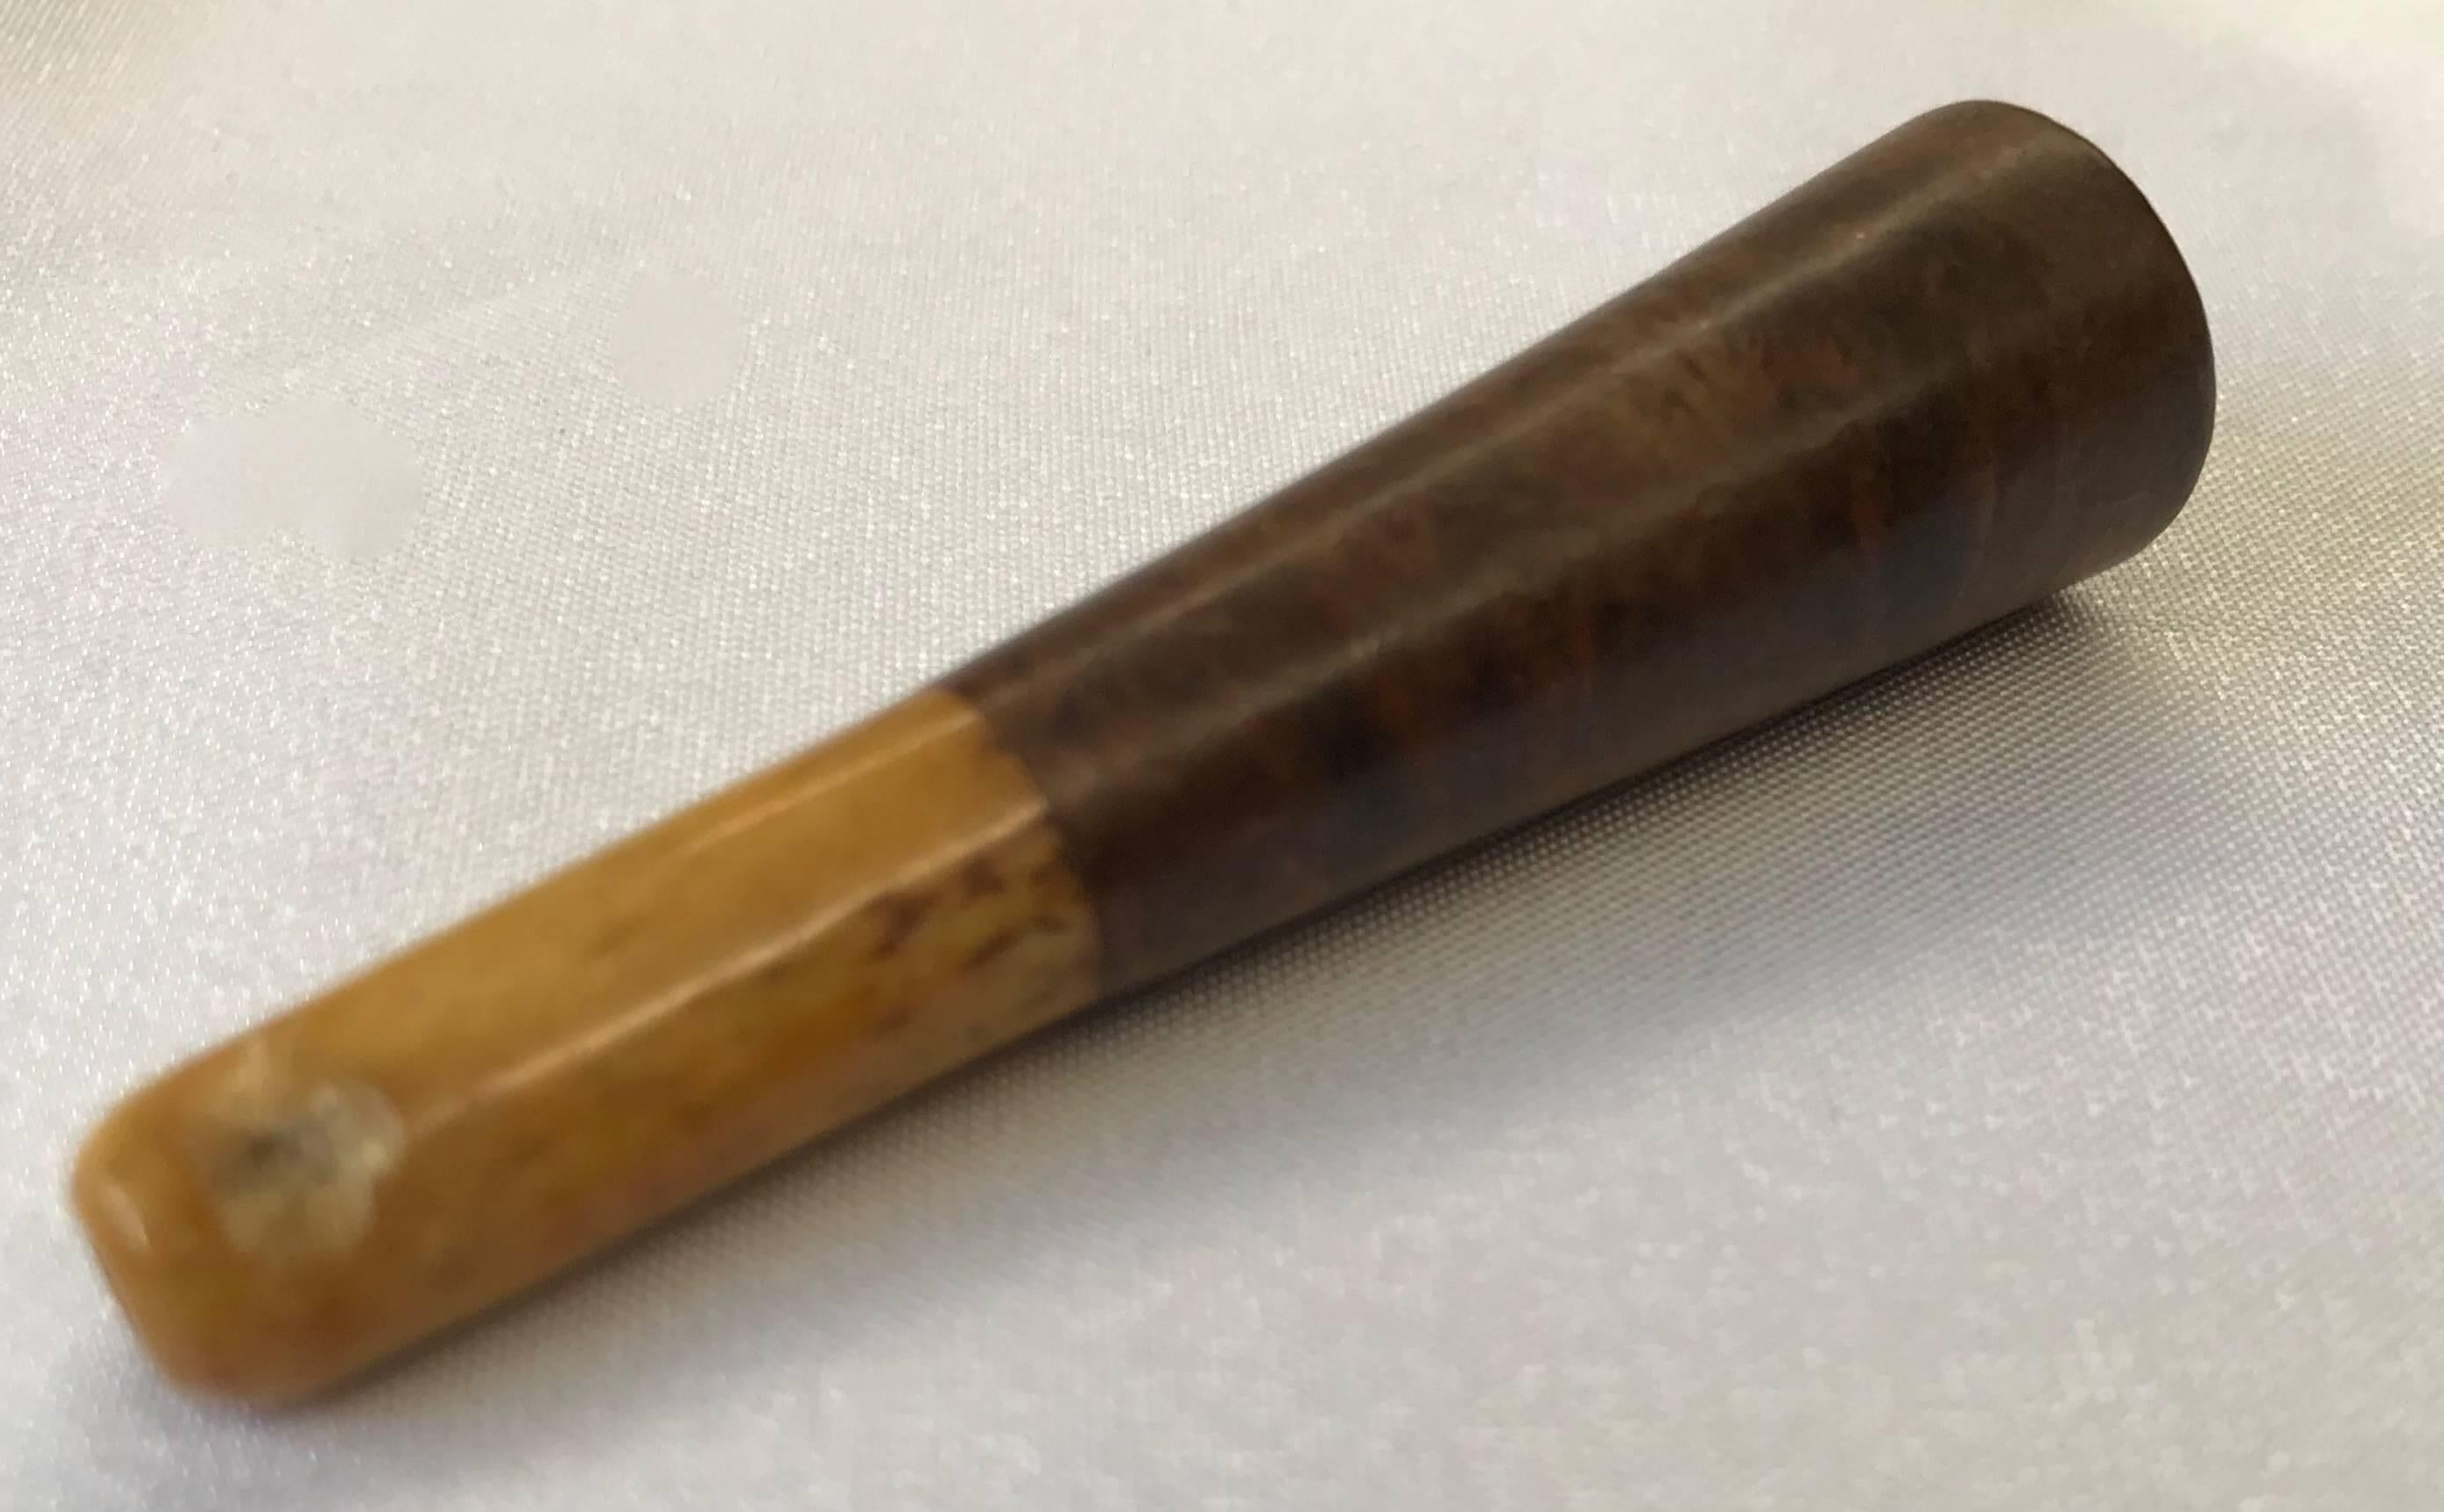 We are offering a vintage, hand carved burled walnut cigarette holder. Oh the stories we wish it could tell!